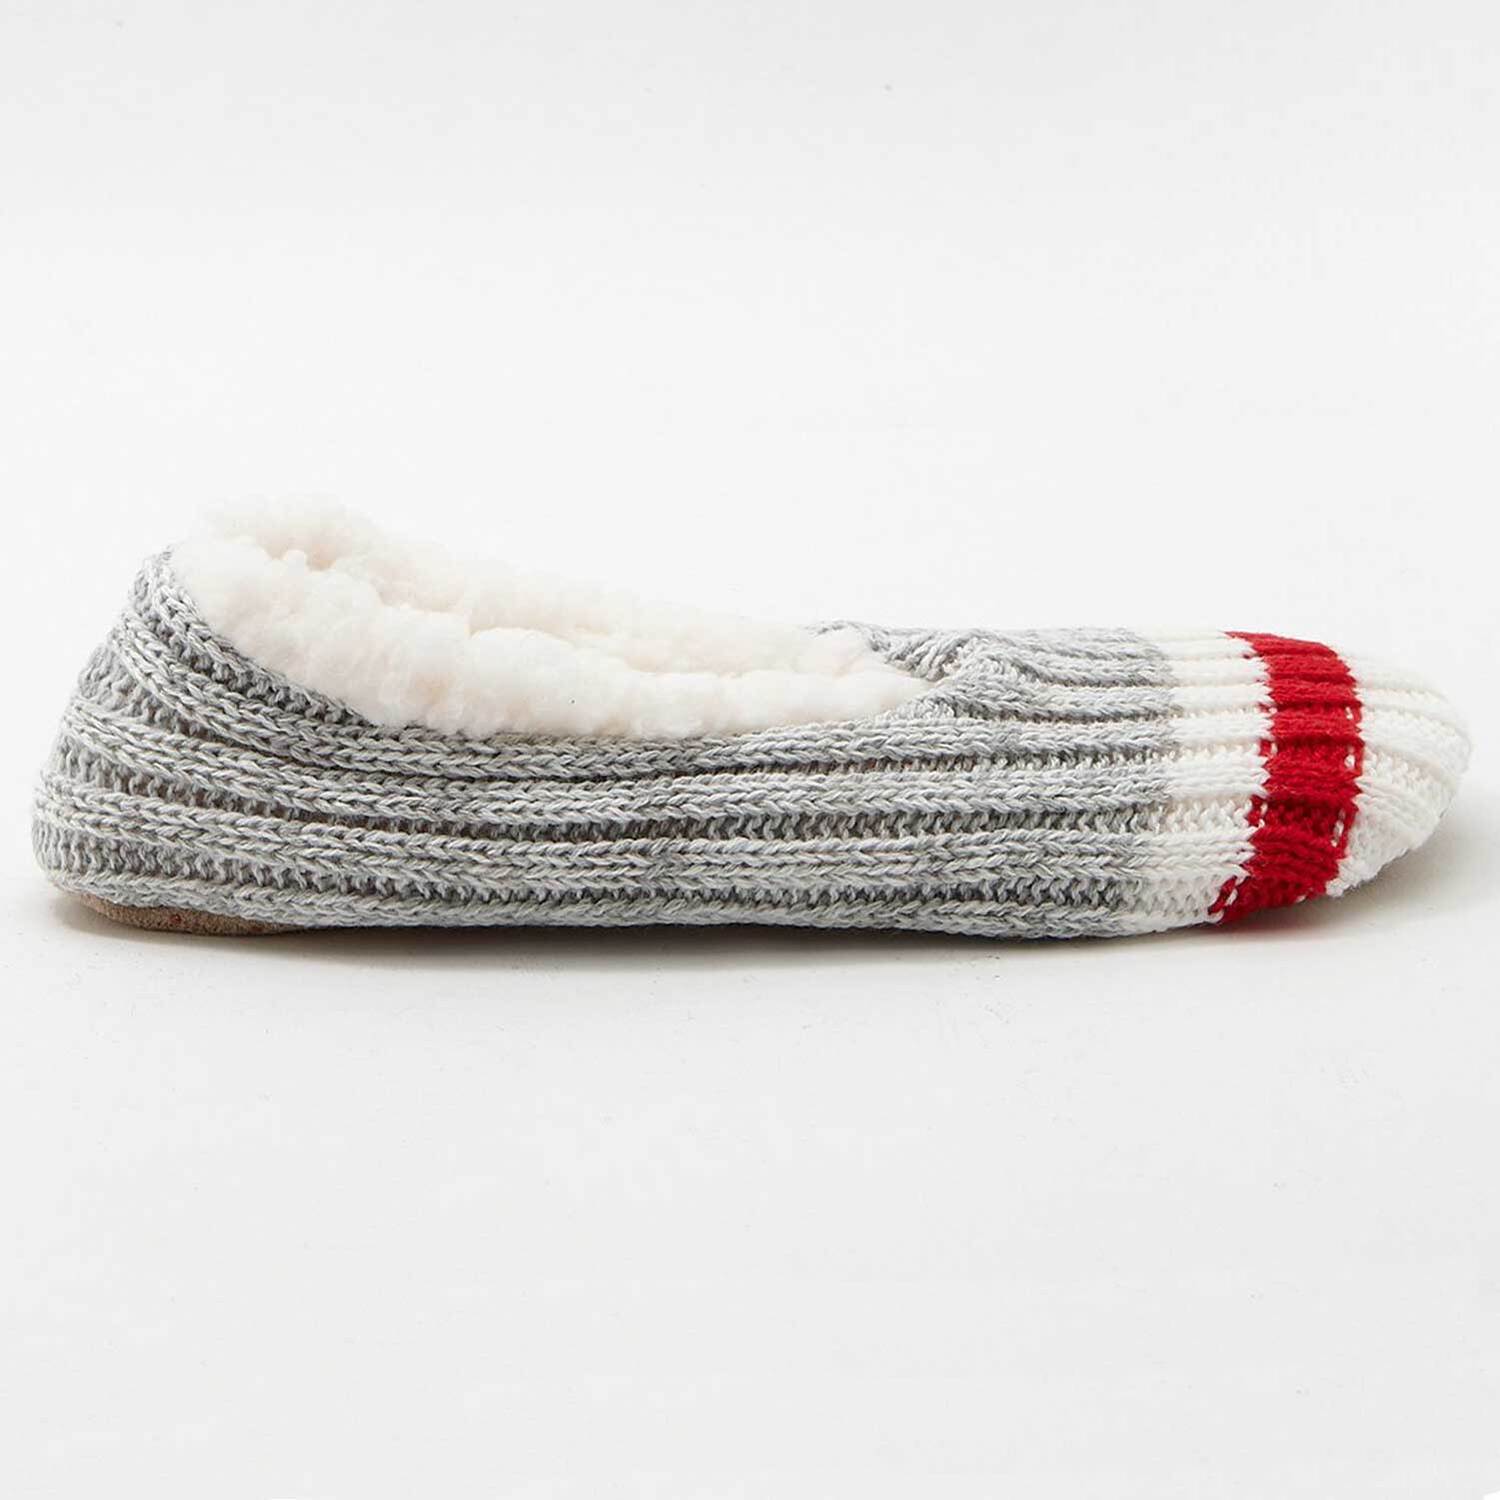 Sock monkey slippers with faux shearling lining, size 7-8, medium (M)